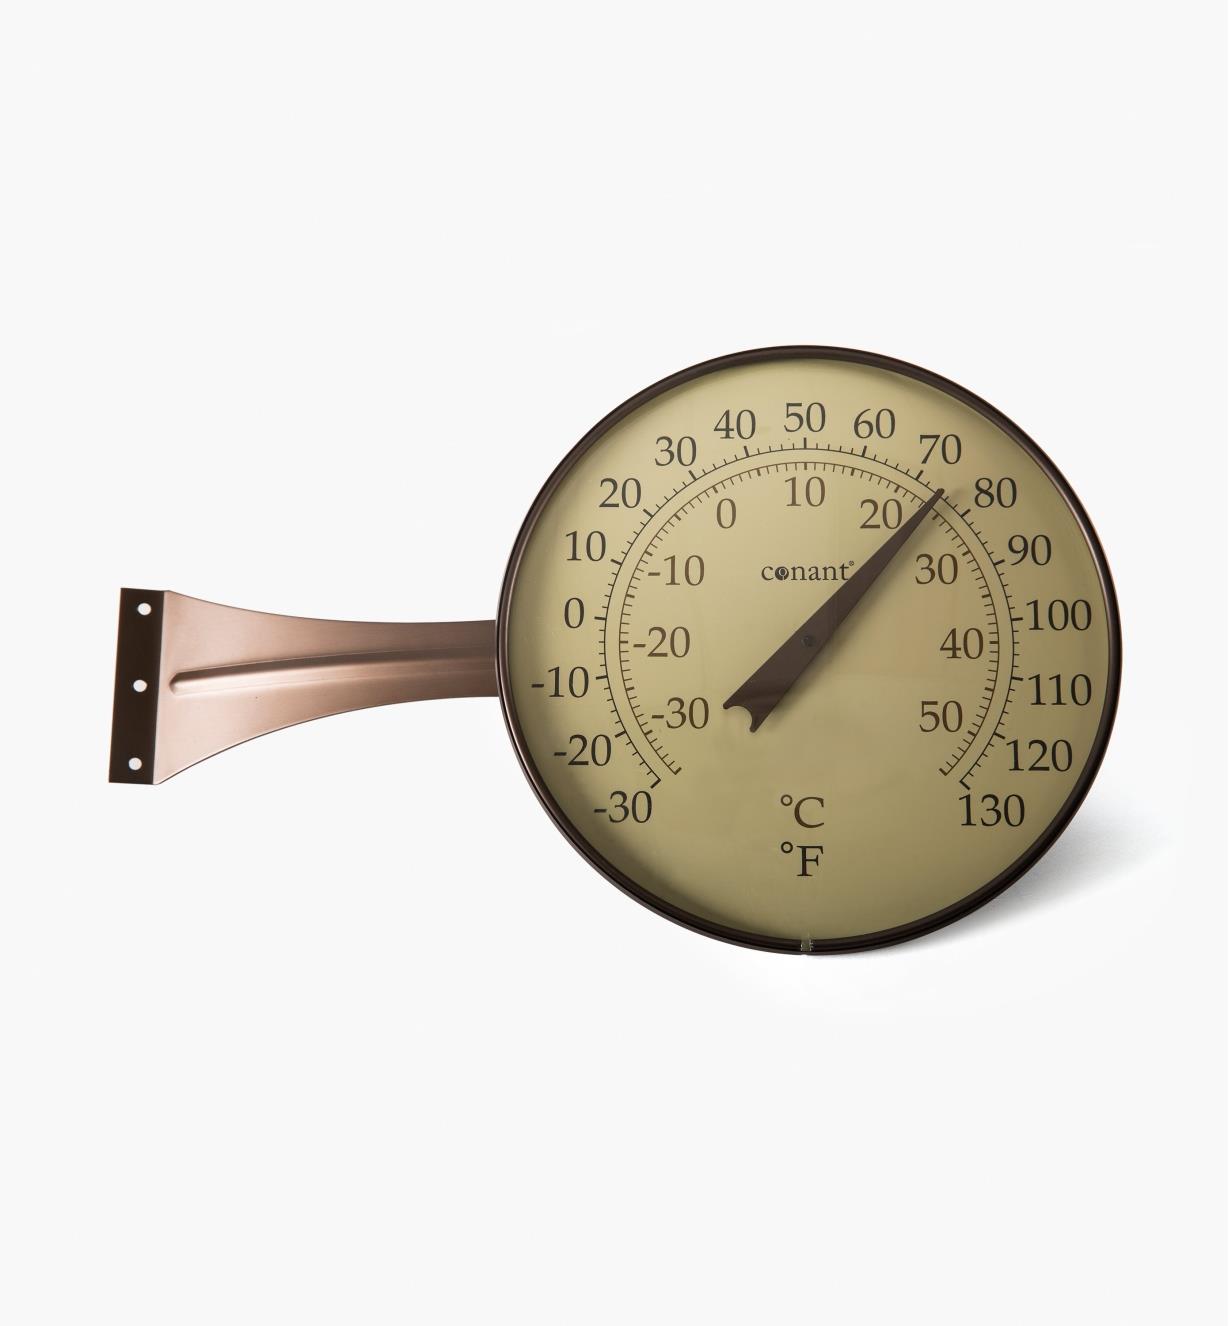 https://assets.leevalley.com/Size4/10025/AB815-large-dial-thermometer-f-01-r.jpg